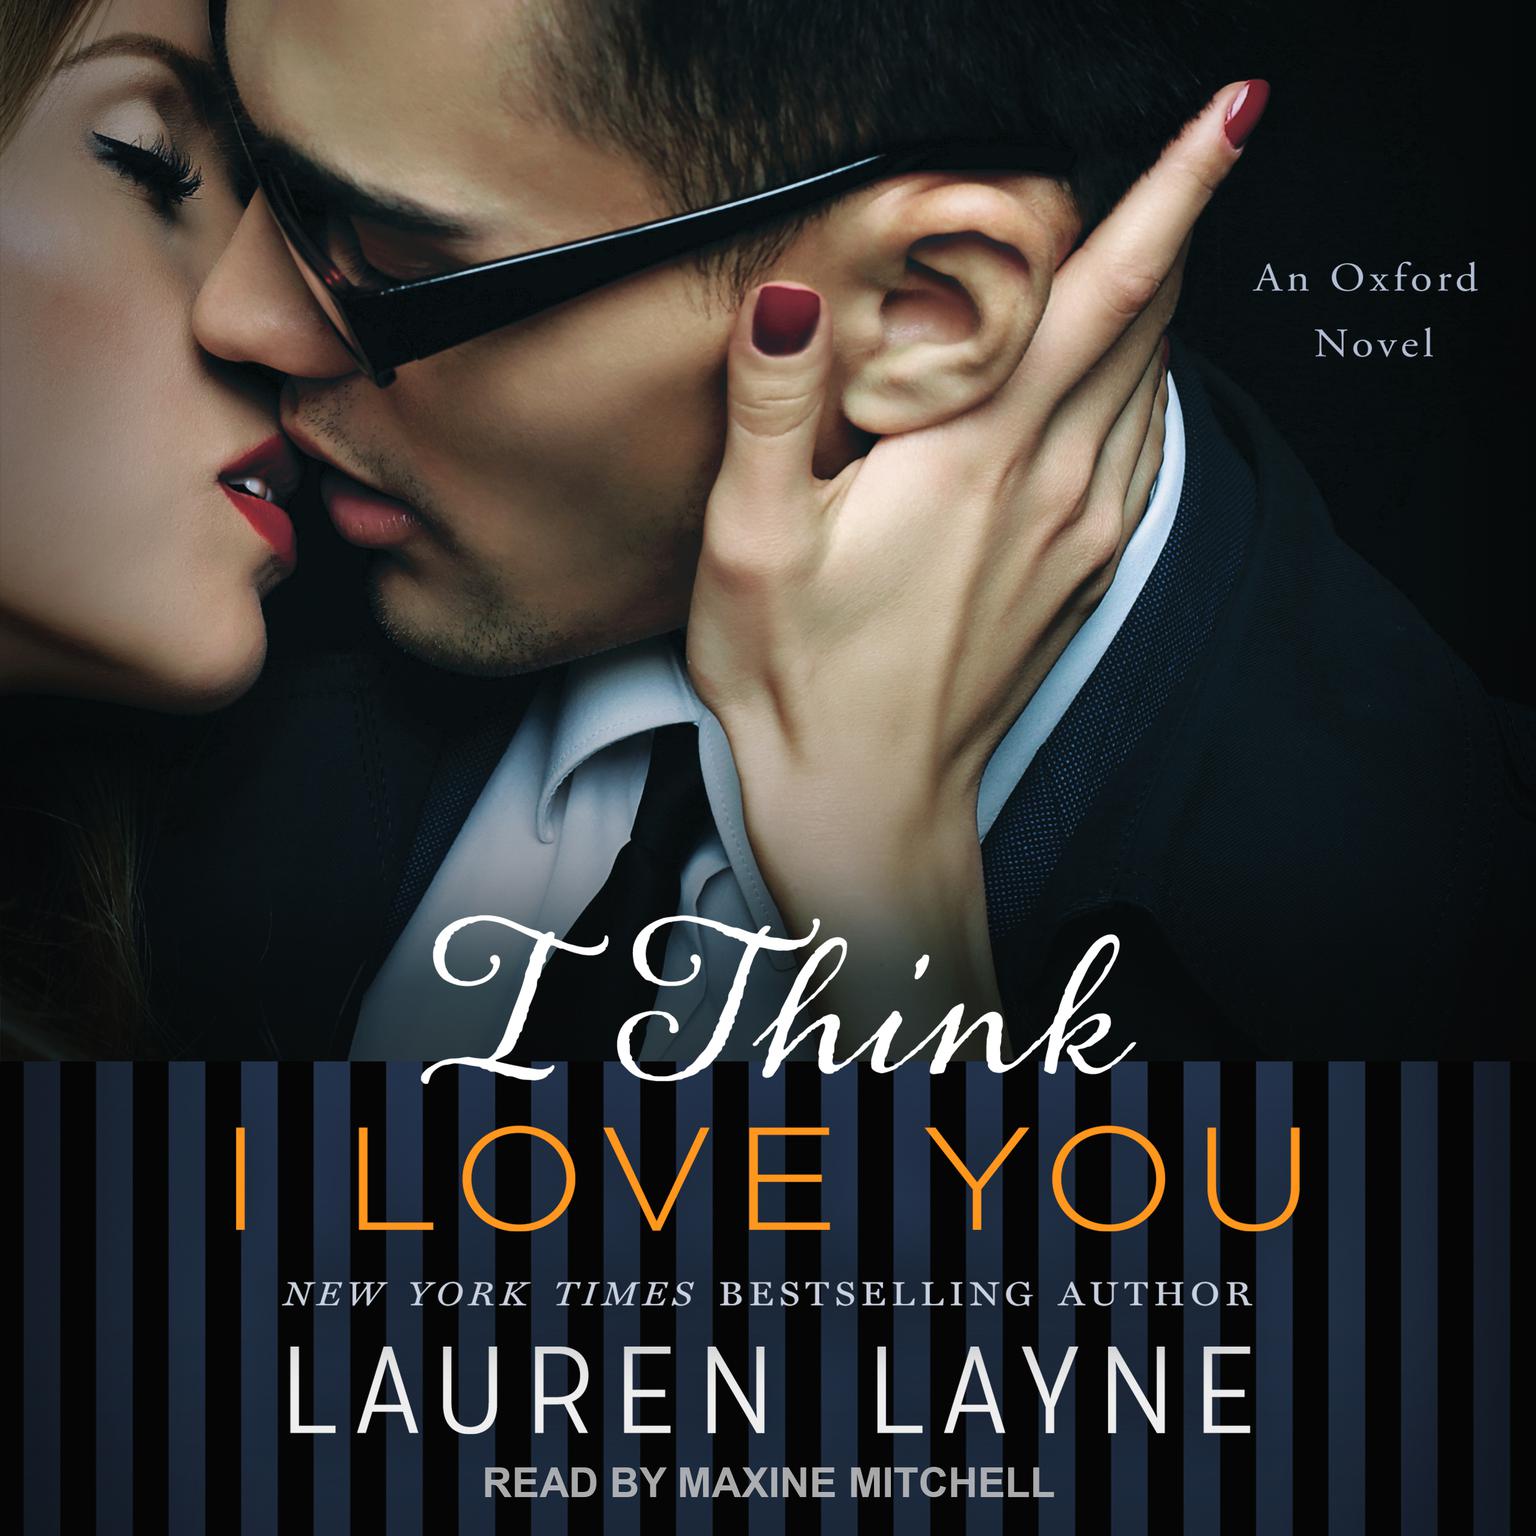 I Think I Love You Audiobook, by Lauren Layne